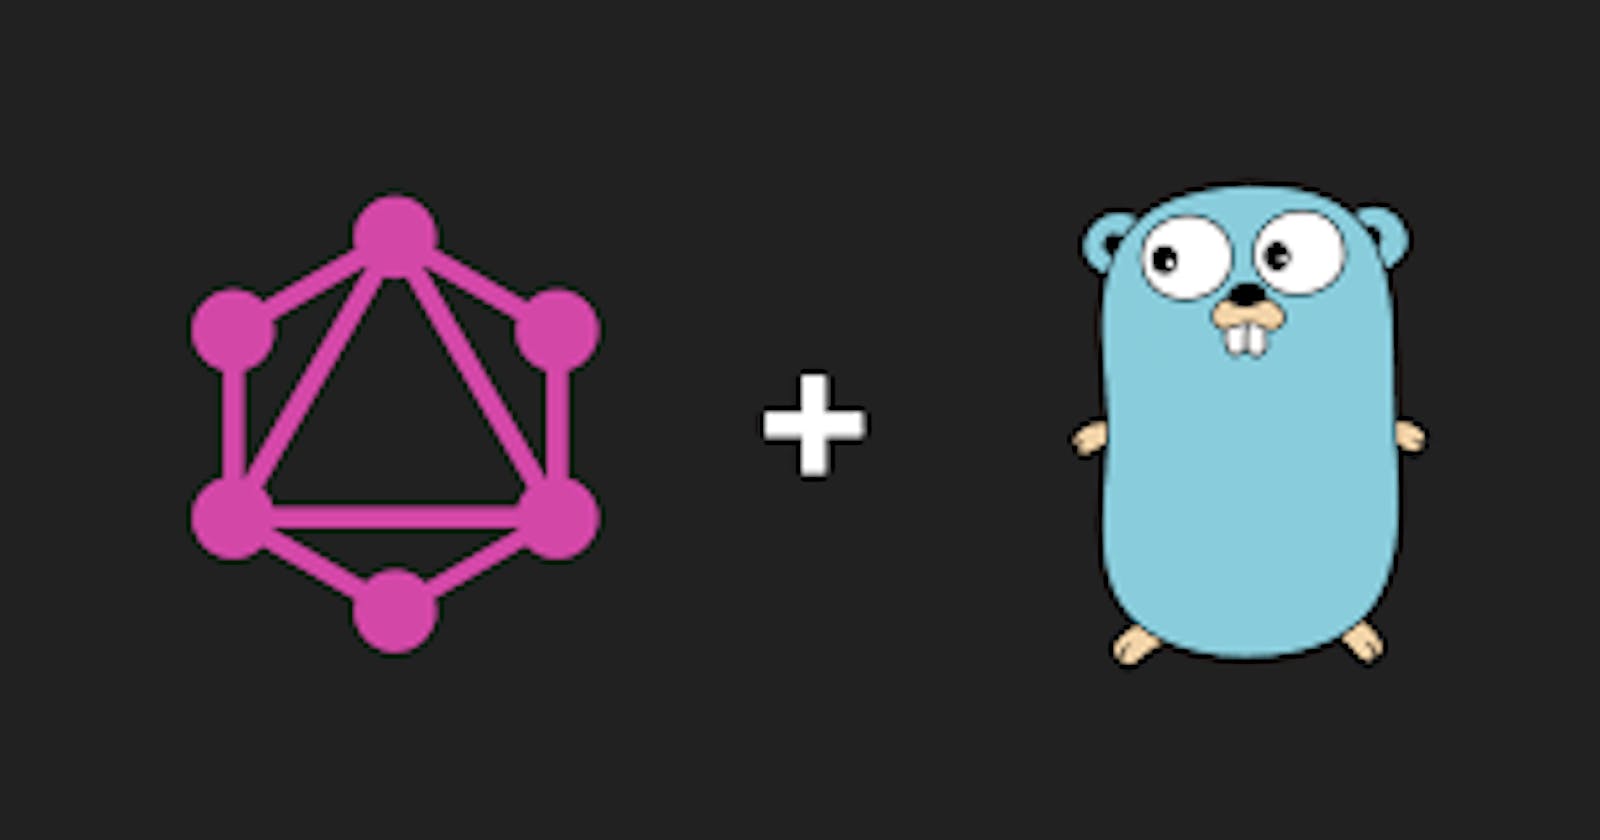 How To use GraphQL with Go